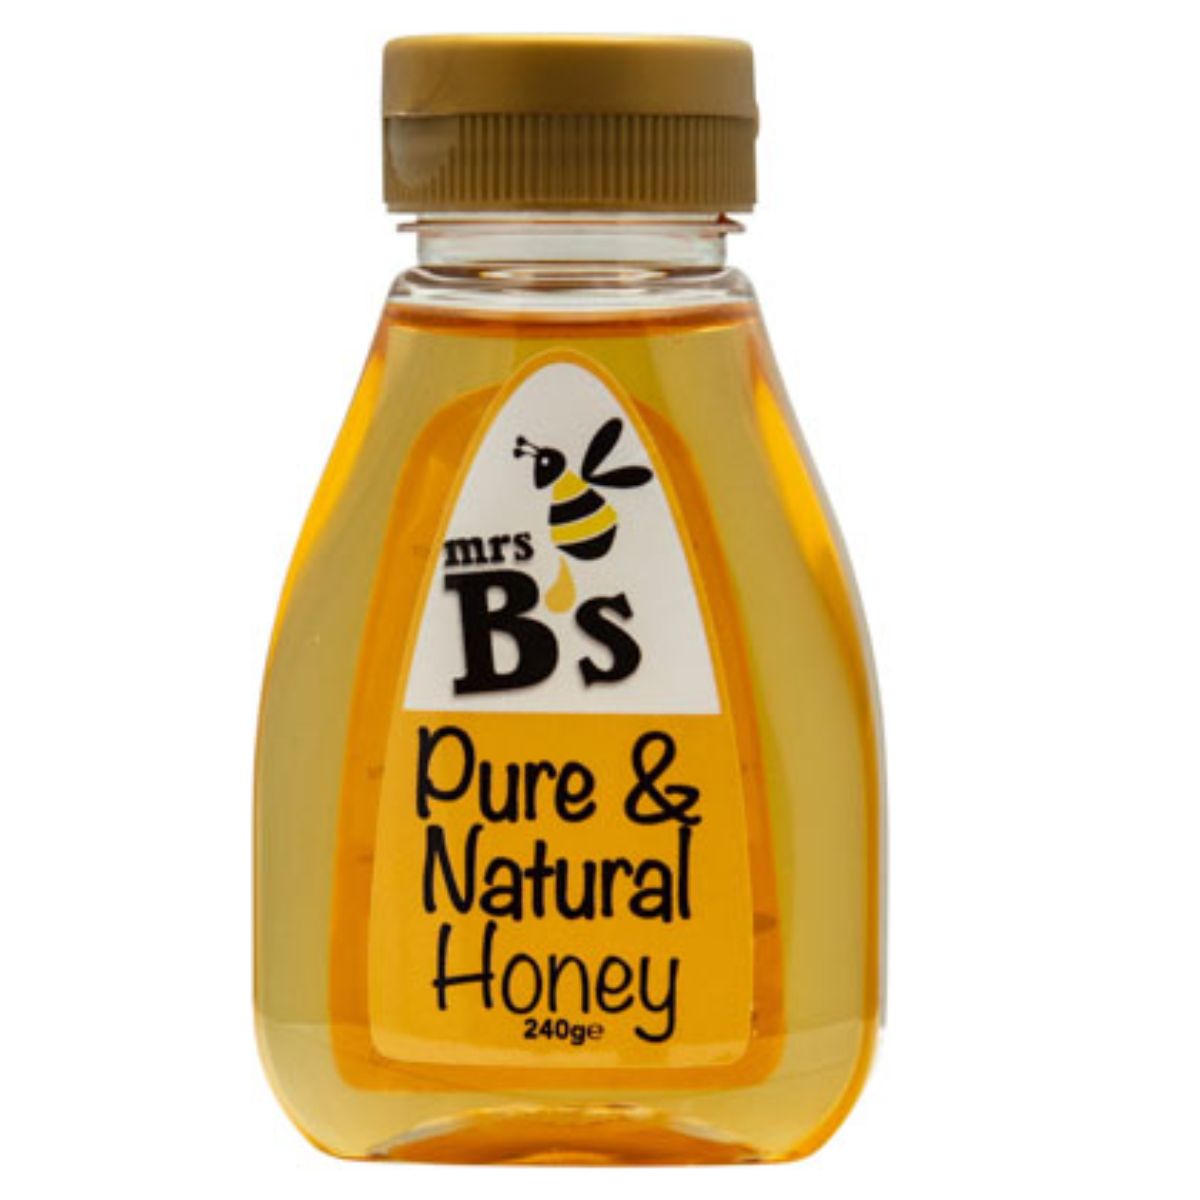 A transparent bottle of Mrs B's - Pure & Natural Honey - 240g.